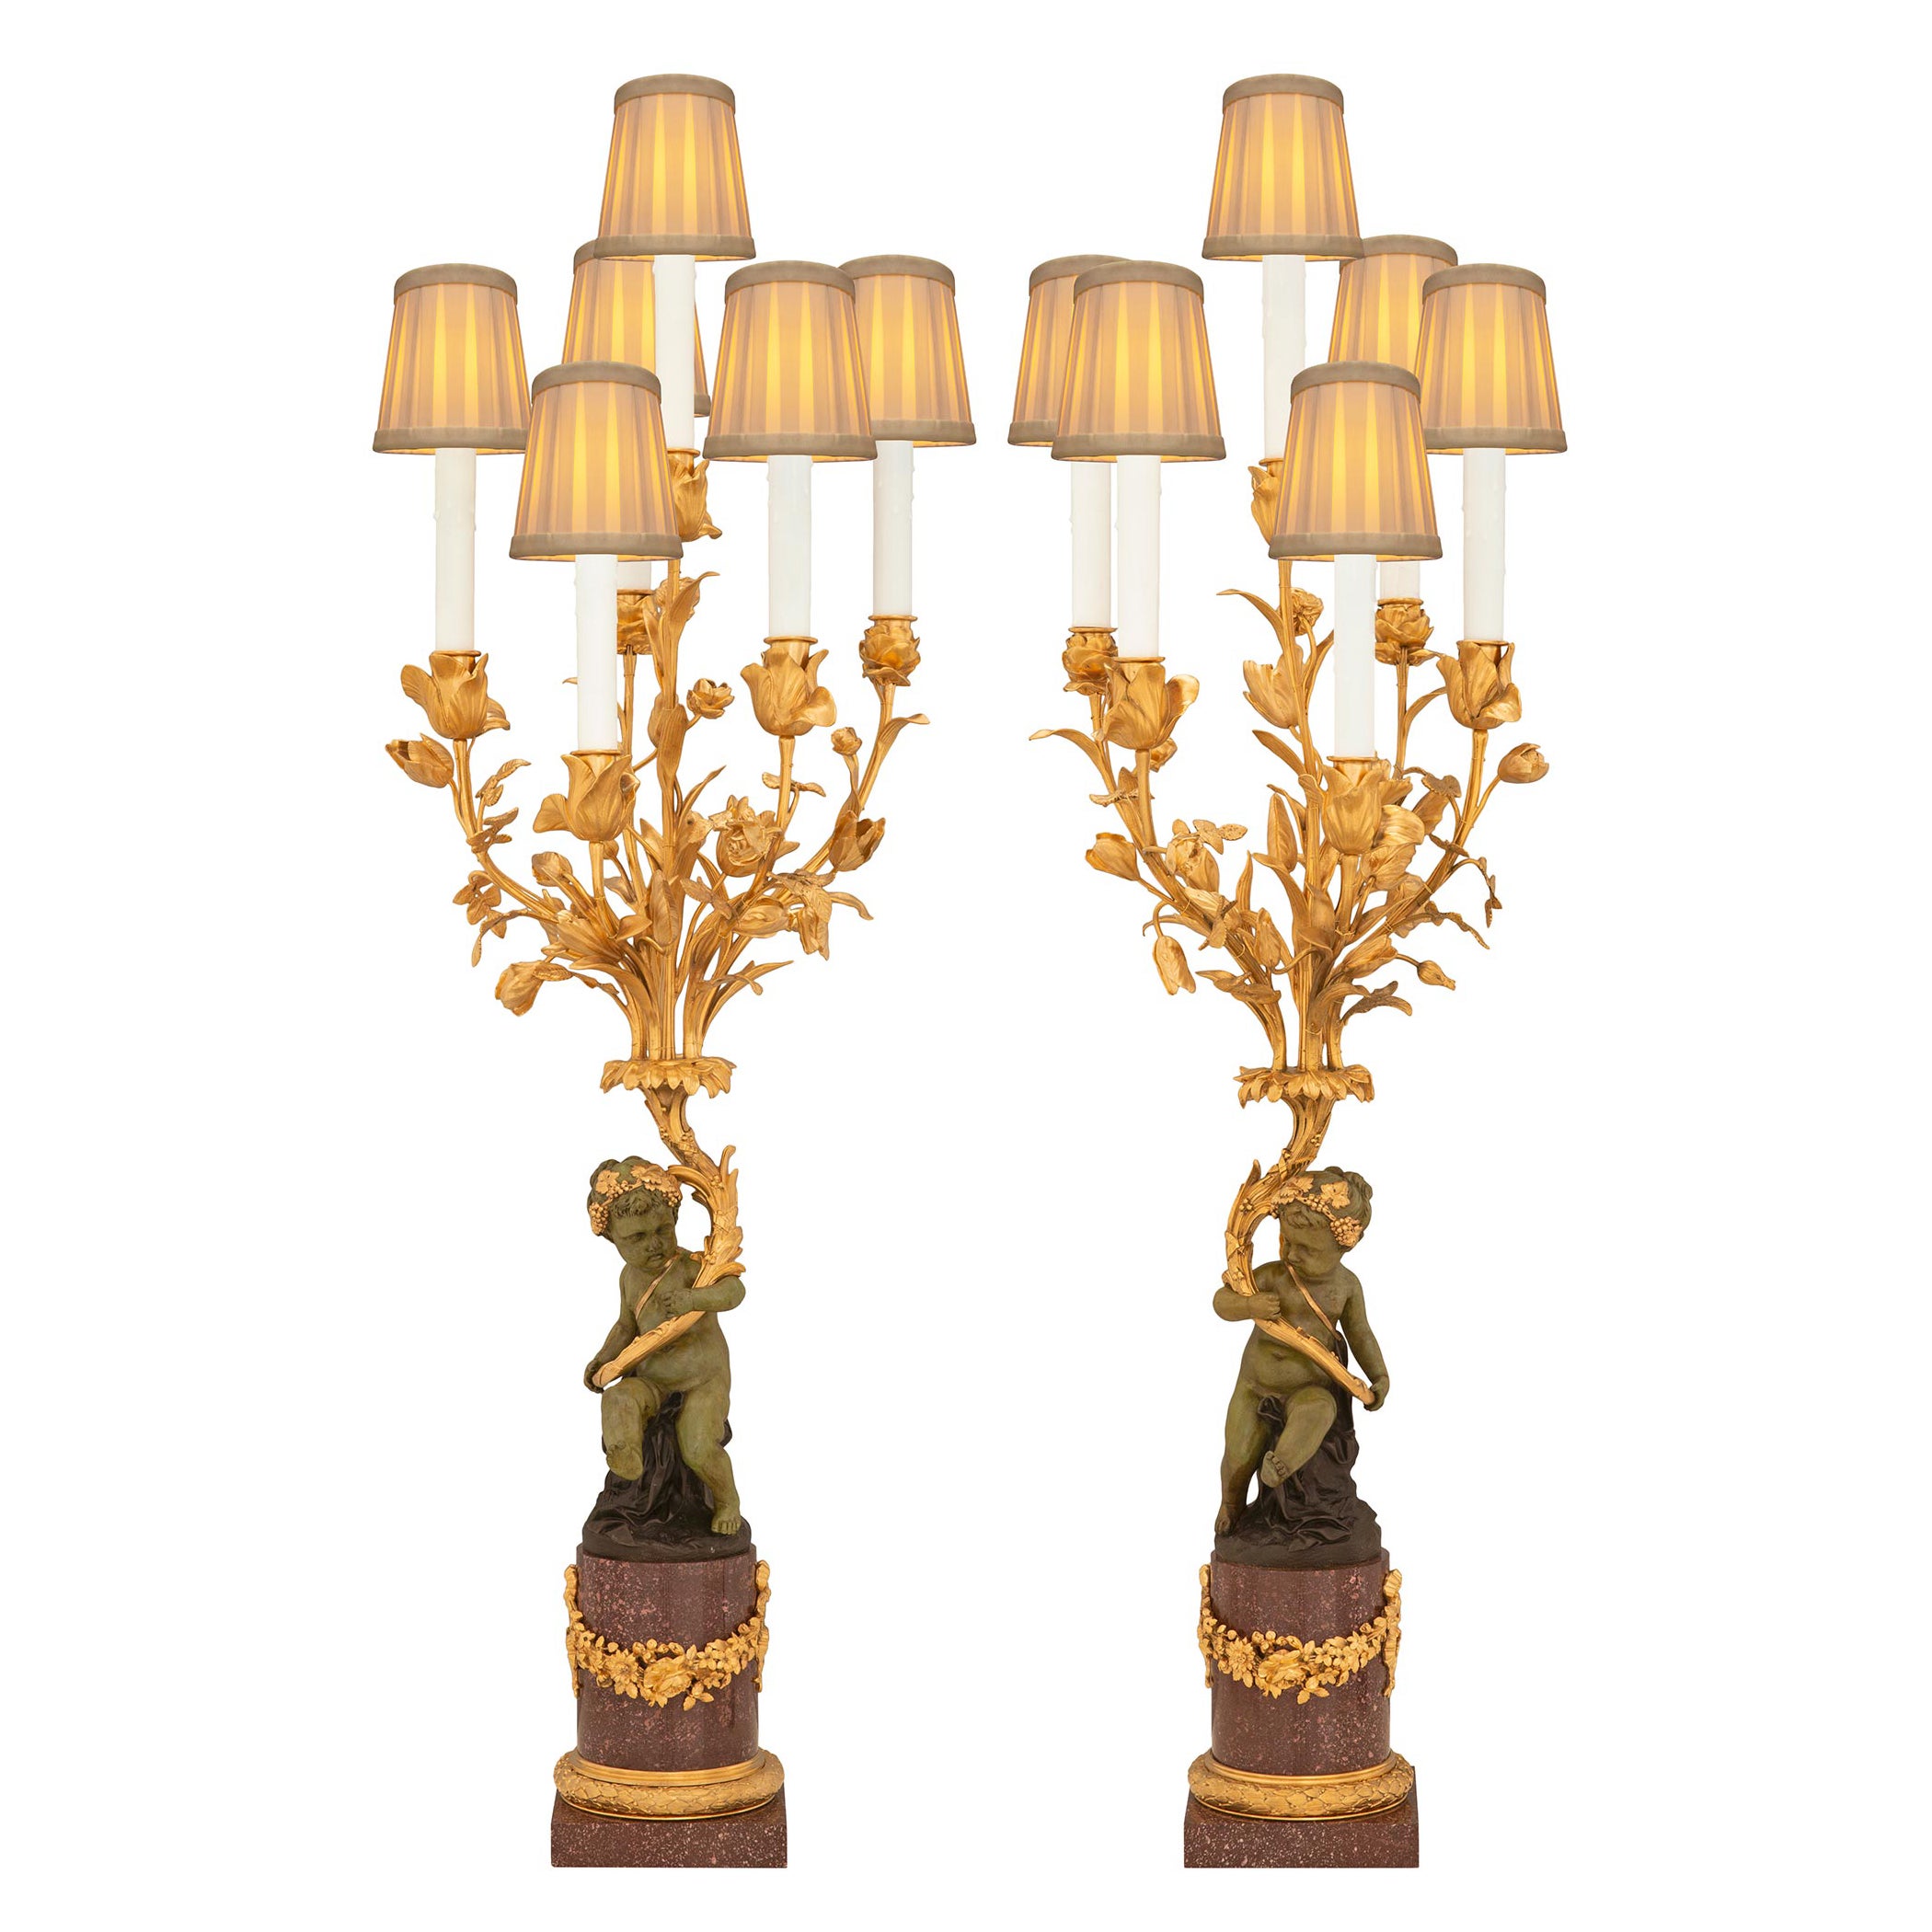 Trueing Pair of French 19th Century Belle Époque Bronze & Porphyry Lamps